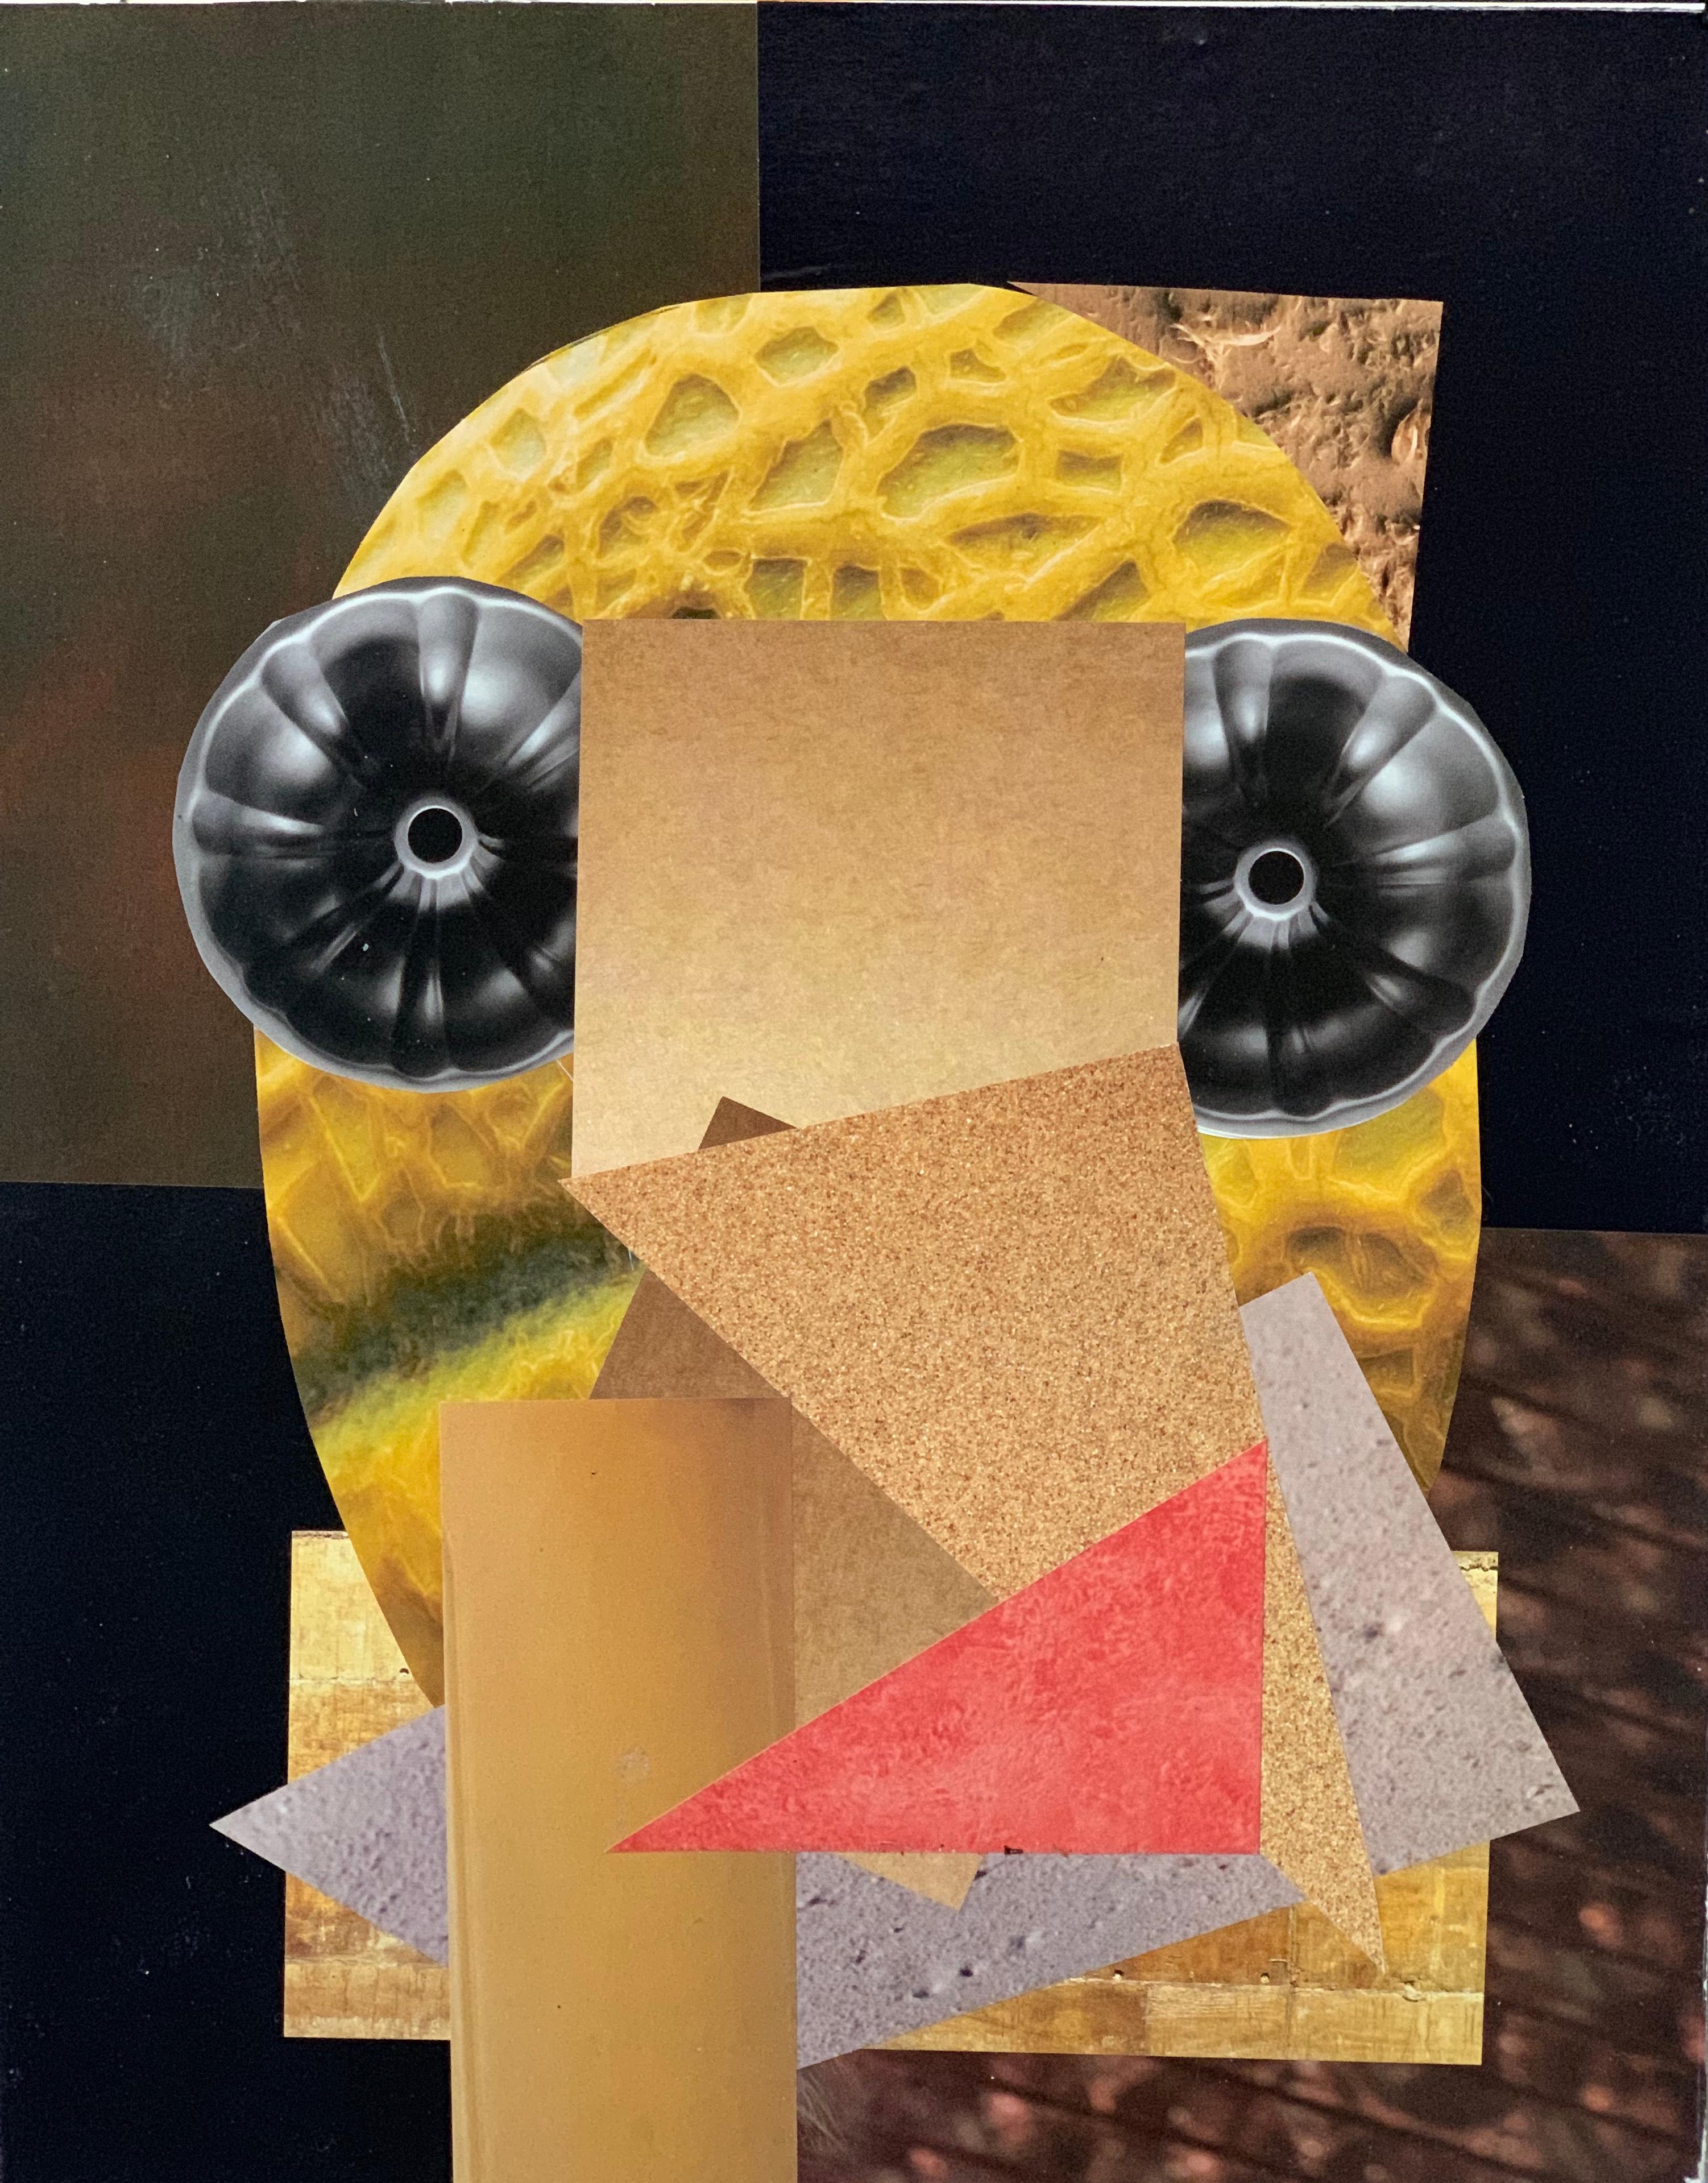 NYC Artist "Bumblebee" Abstract Collage  - Mixed Media Art by John Peters